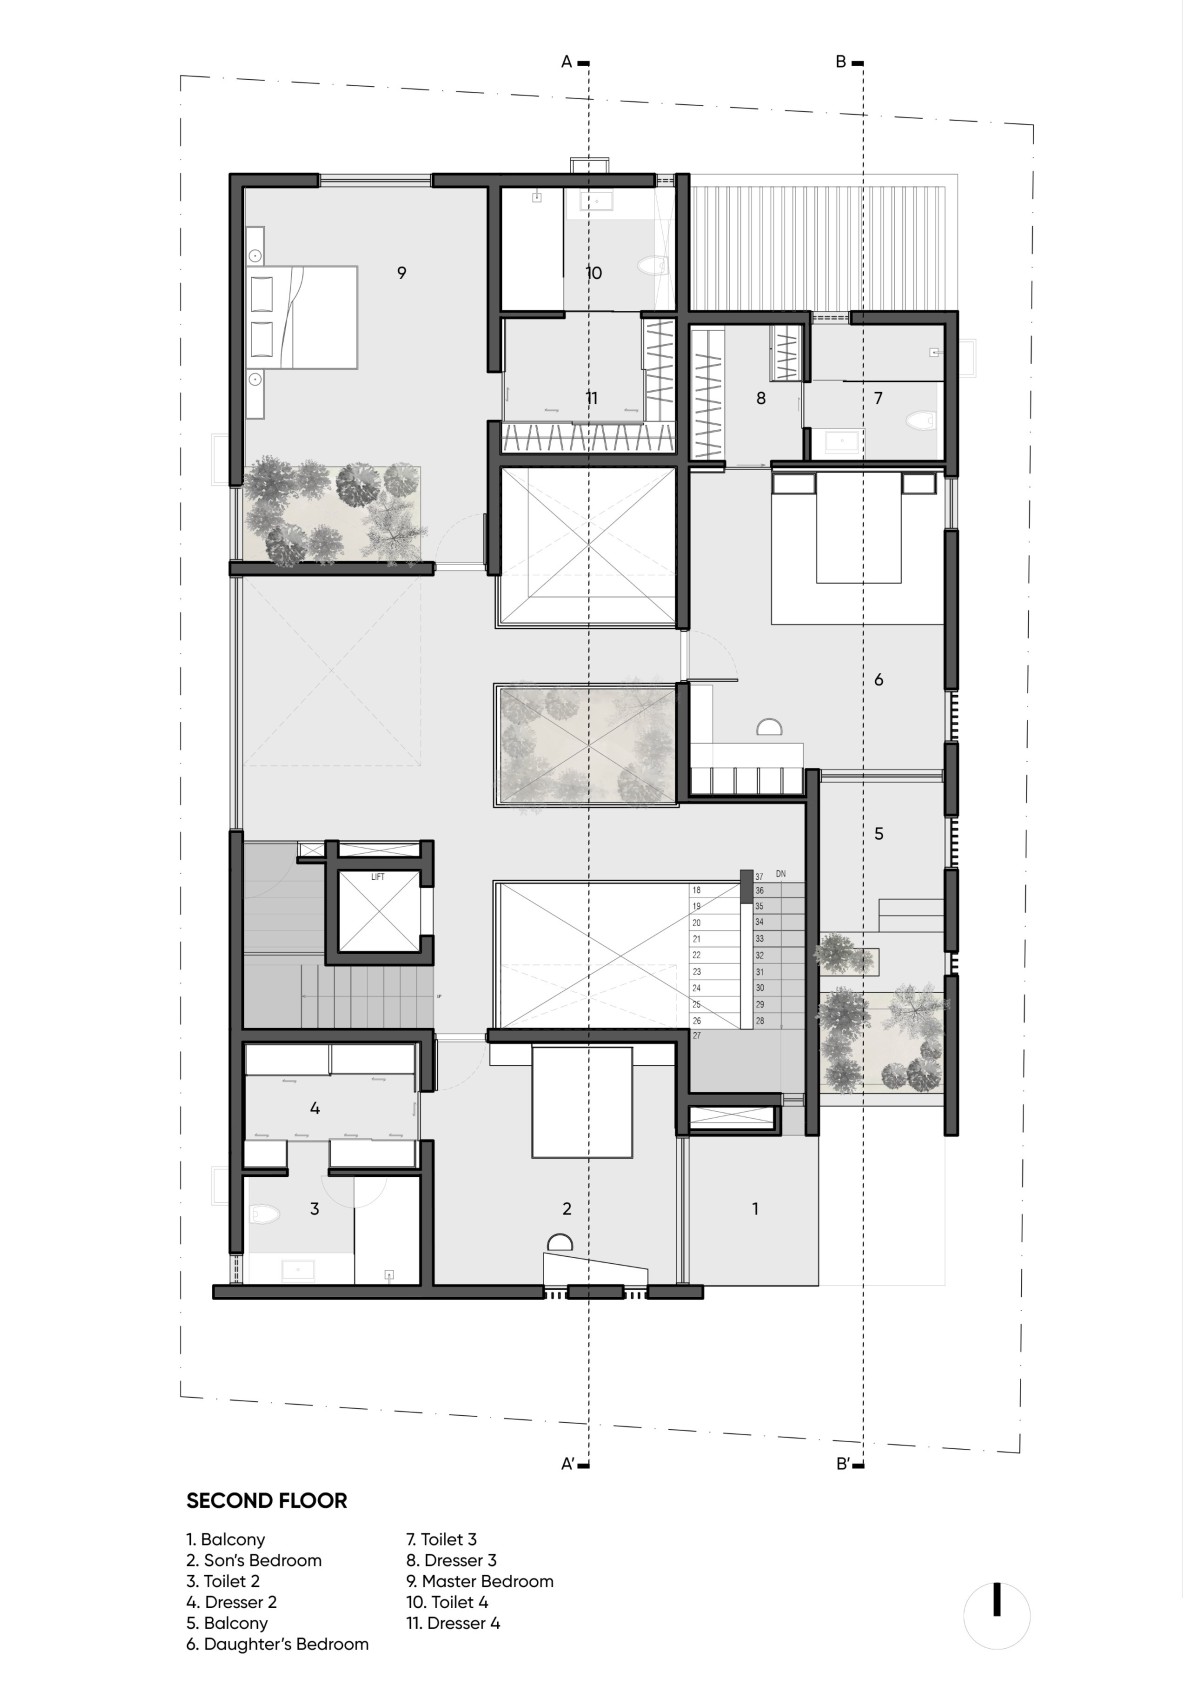 Second floor plan of Janani House by Collage Architecture Studio